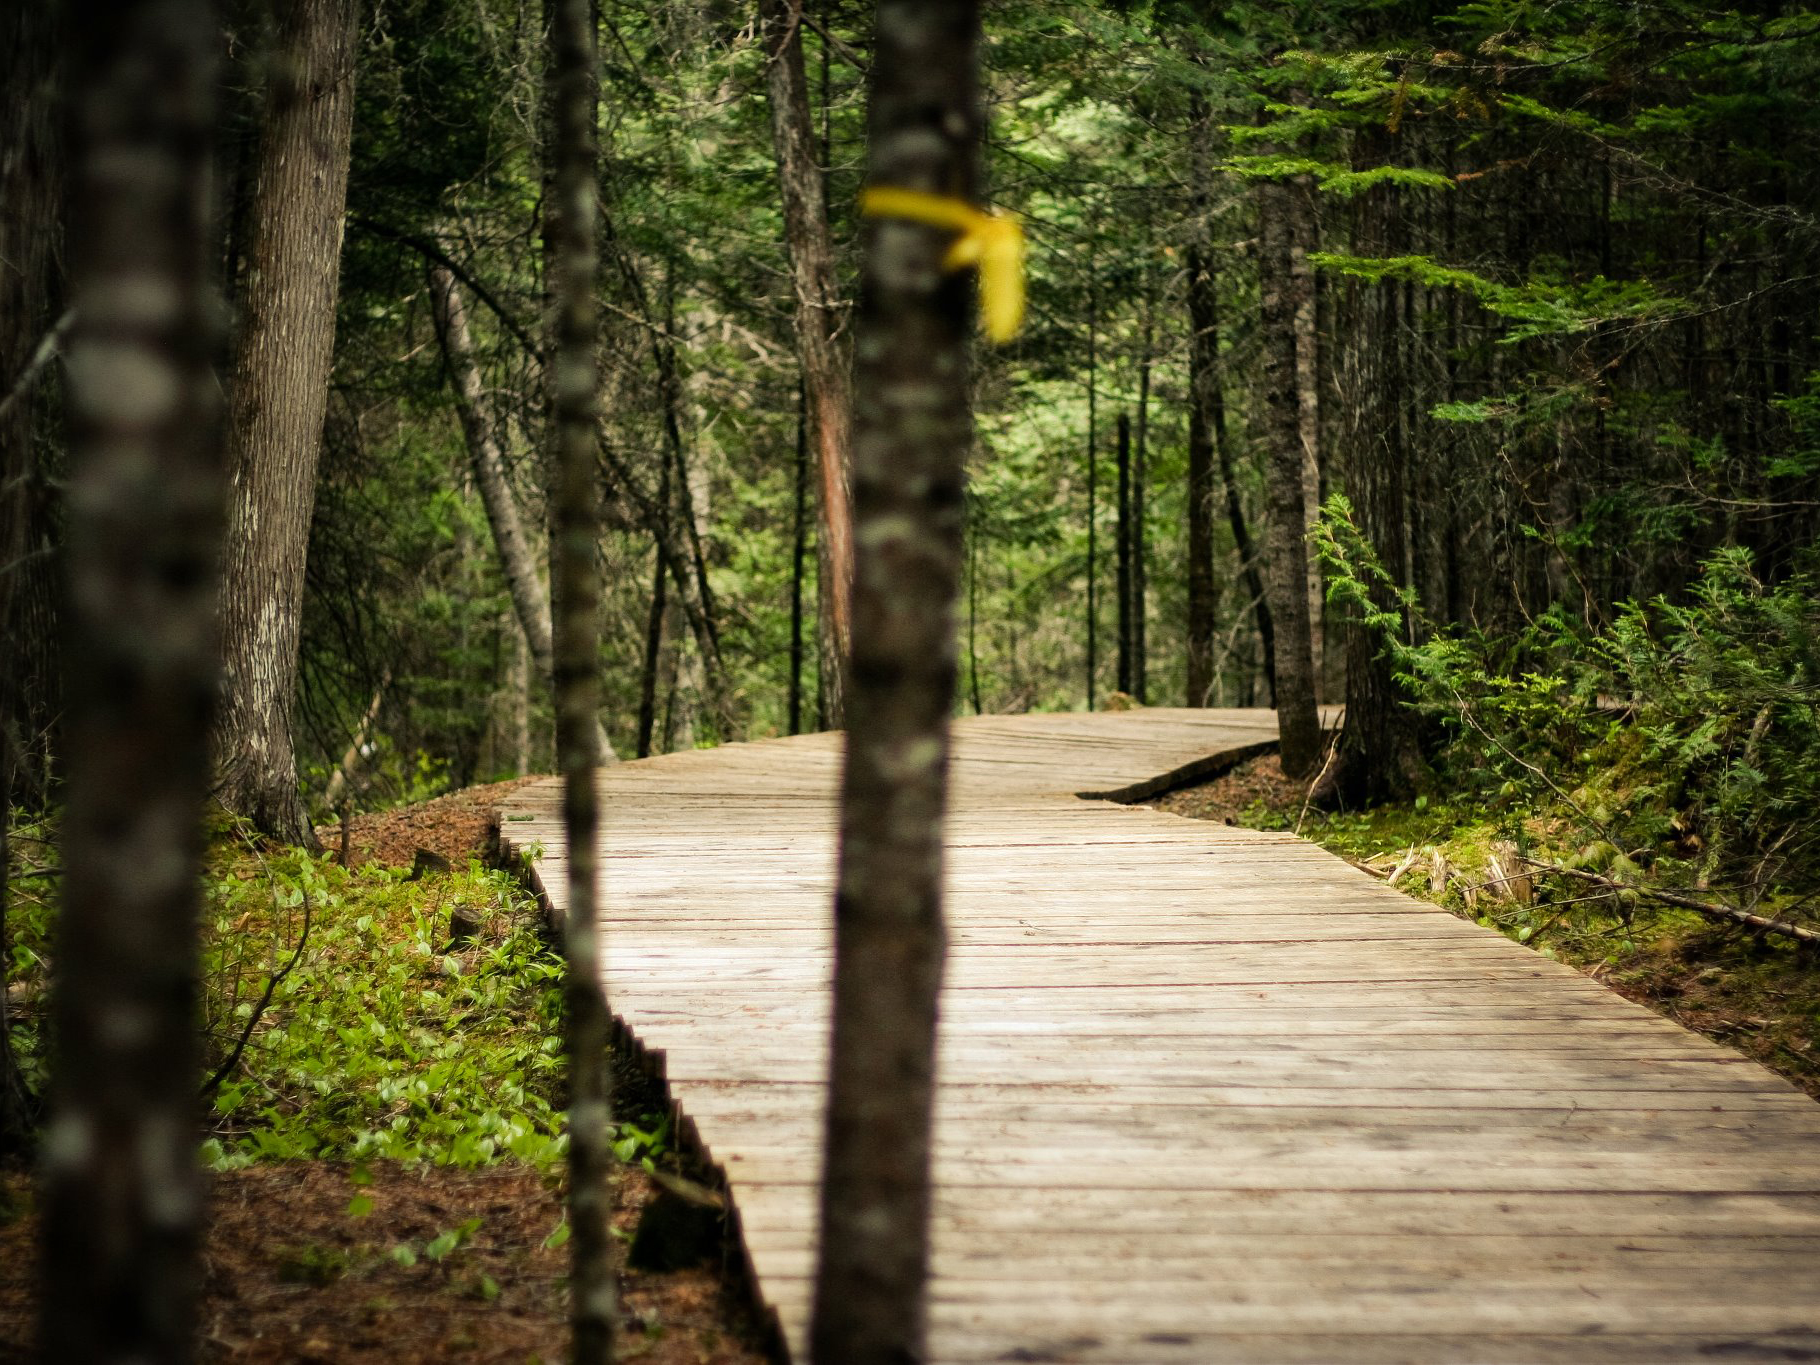 Mountain biking seems harmless but can damage soil and scare wildlife. Image: vonm.ca
